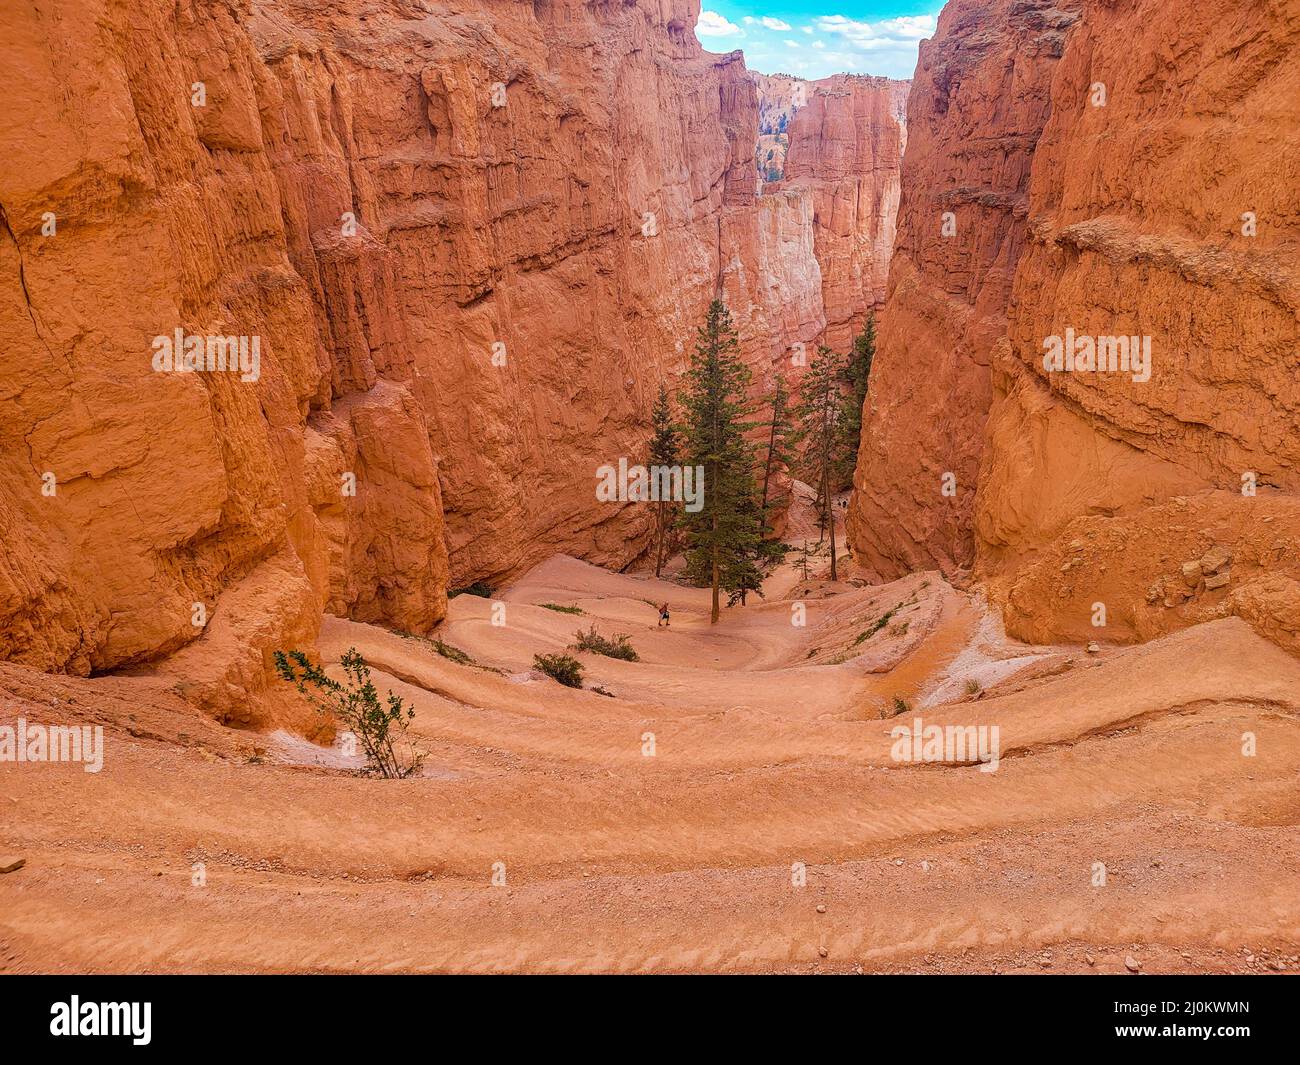 Bryce Canyon National Park Wall Street Foto Stock